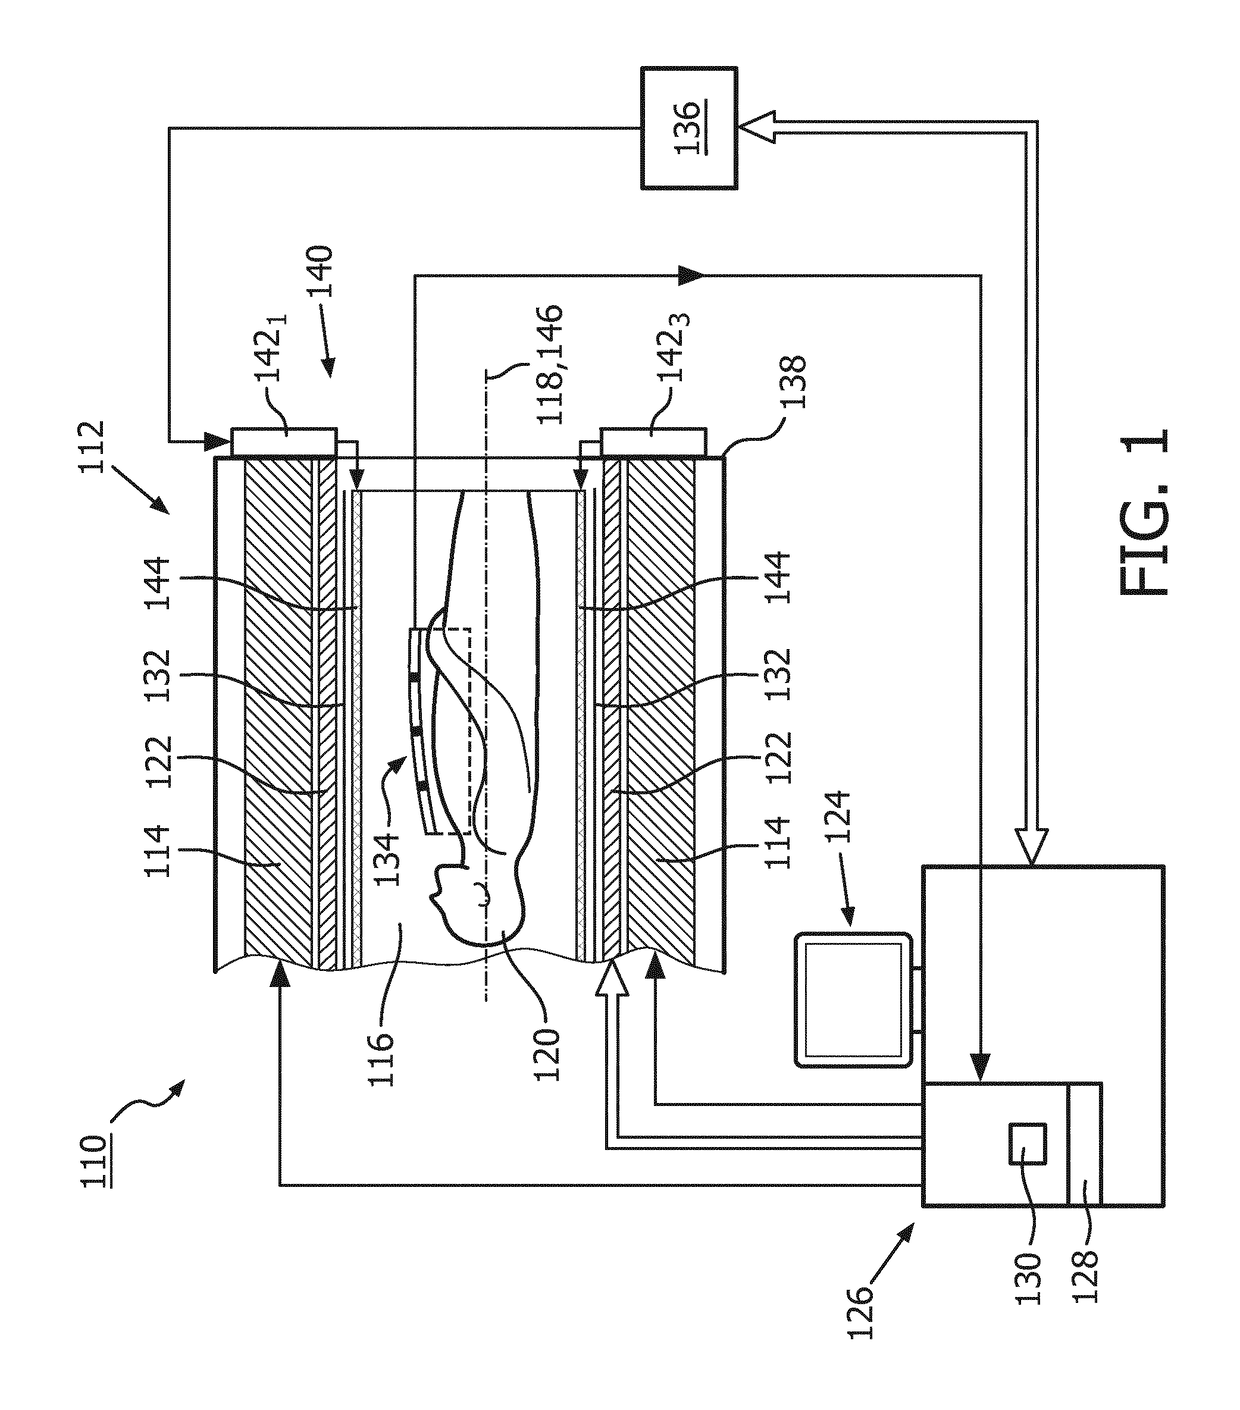 MRI birdcage coil with distributed excitation